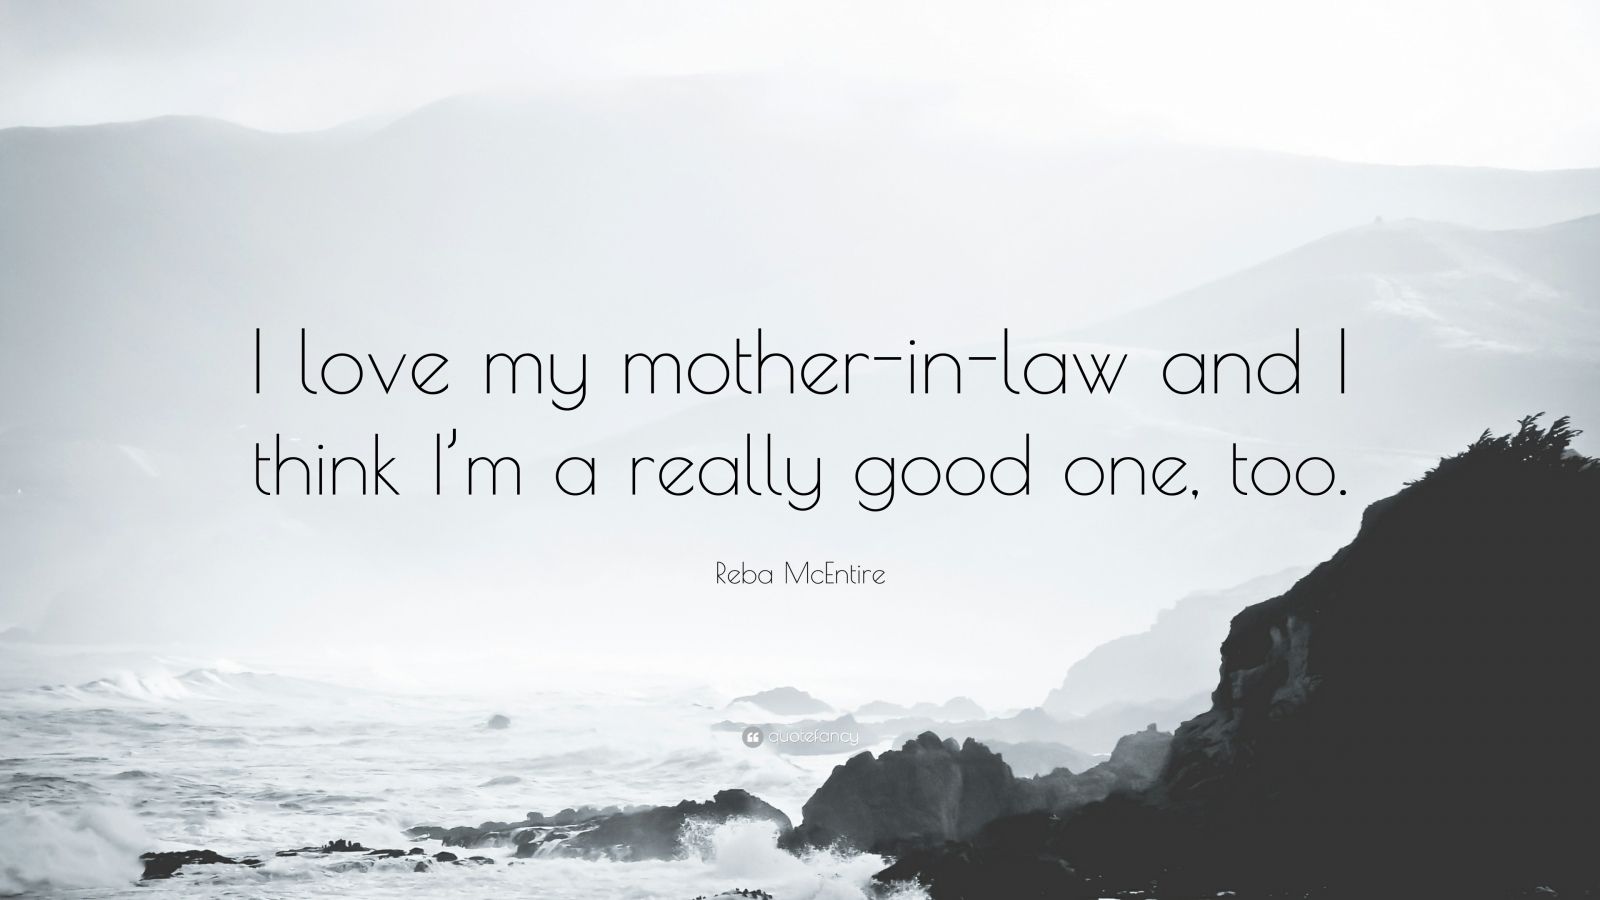 Reba McEntire Quote “I love my mother in law and I think